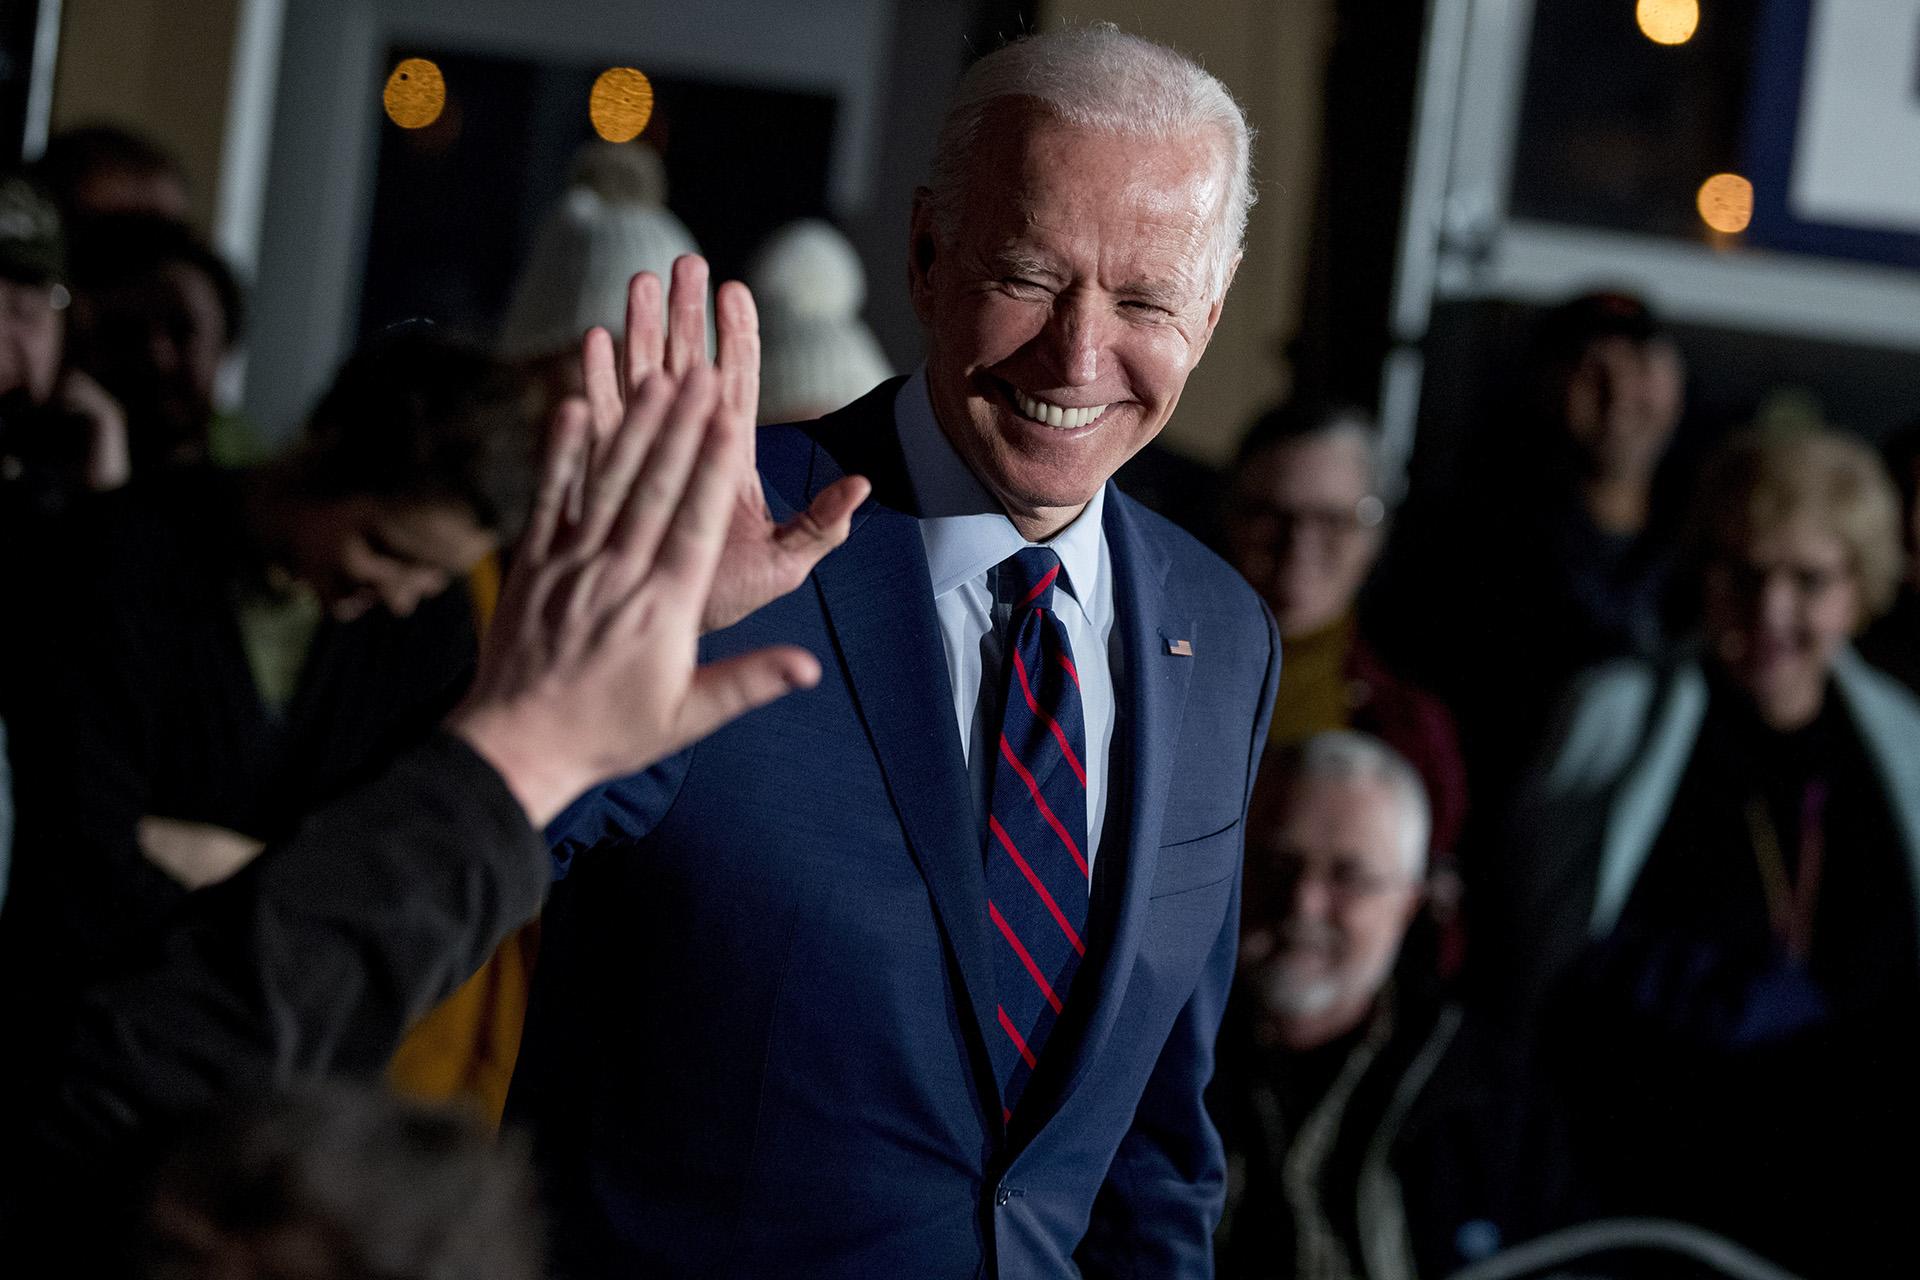 In this Jan. 5, 2020, file photo Democratic presidential candidate, former Vice President Joe Biden high-fives a member of the audience during a campaign rally at Modern Woodmen Park in Davenport, Iowa. (AP Photo / Andrew Harnik, File)